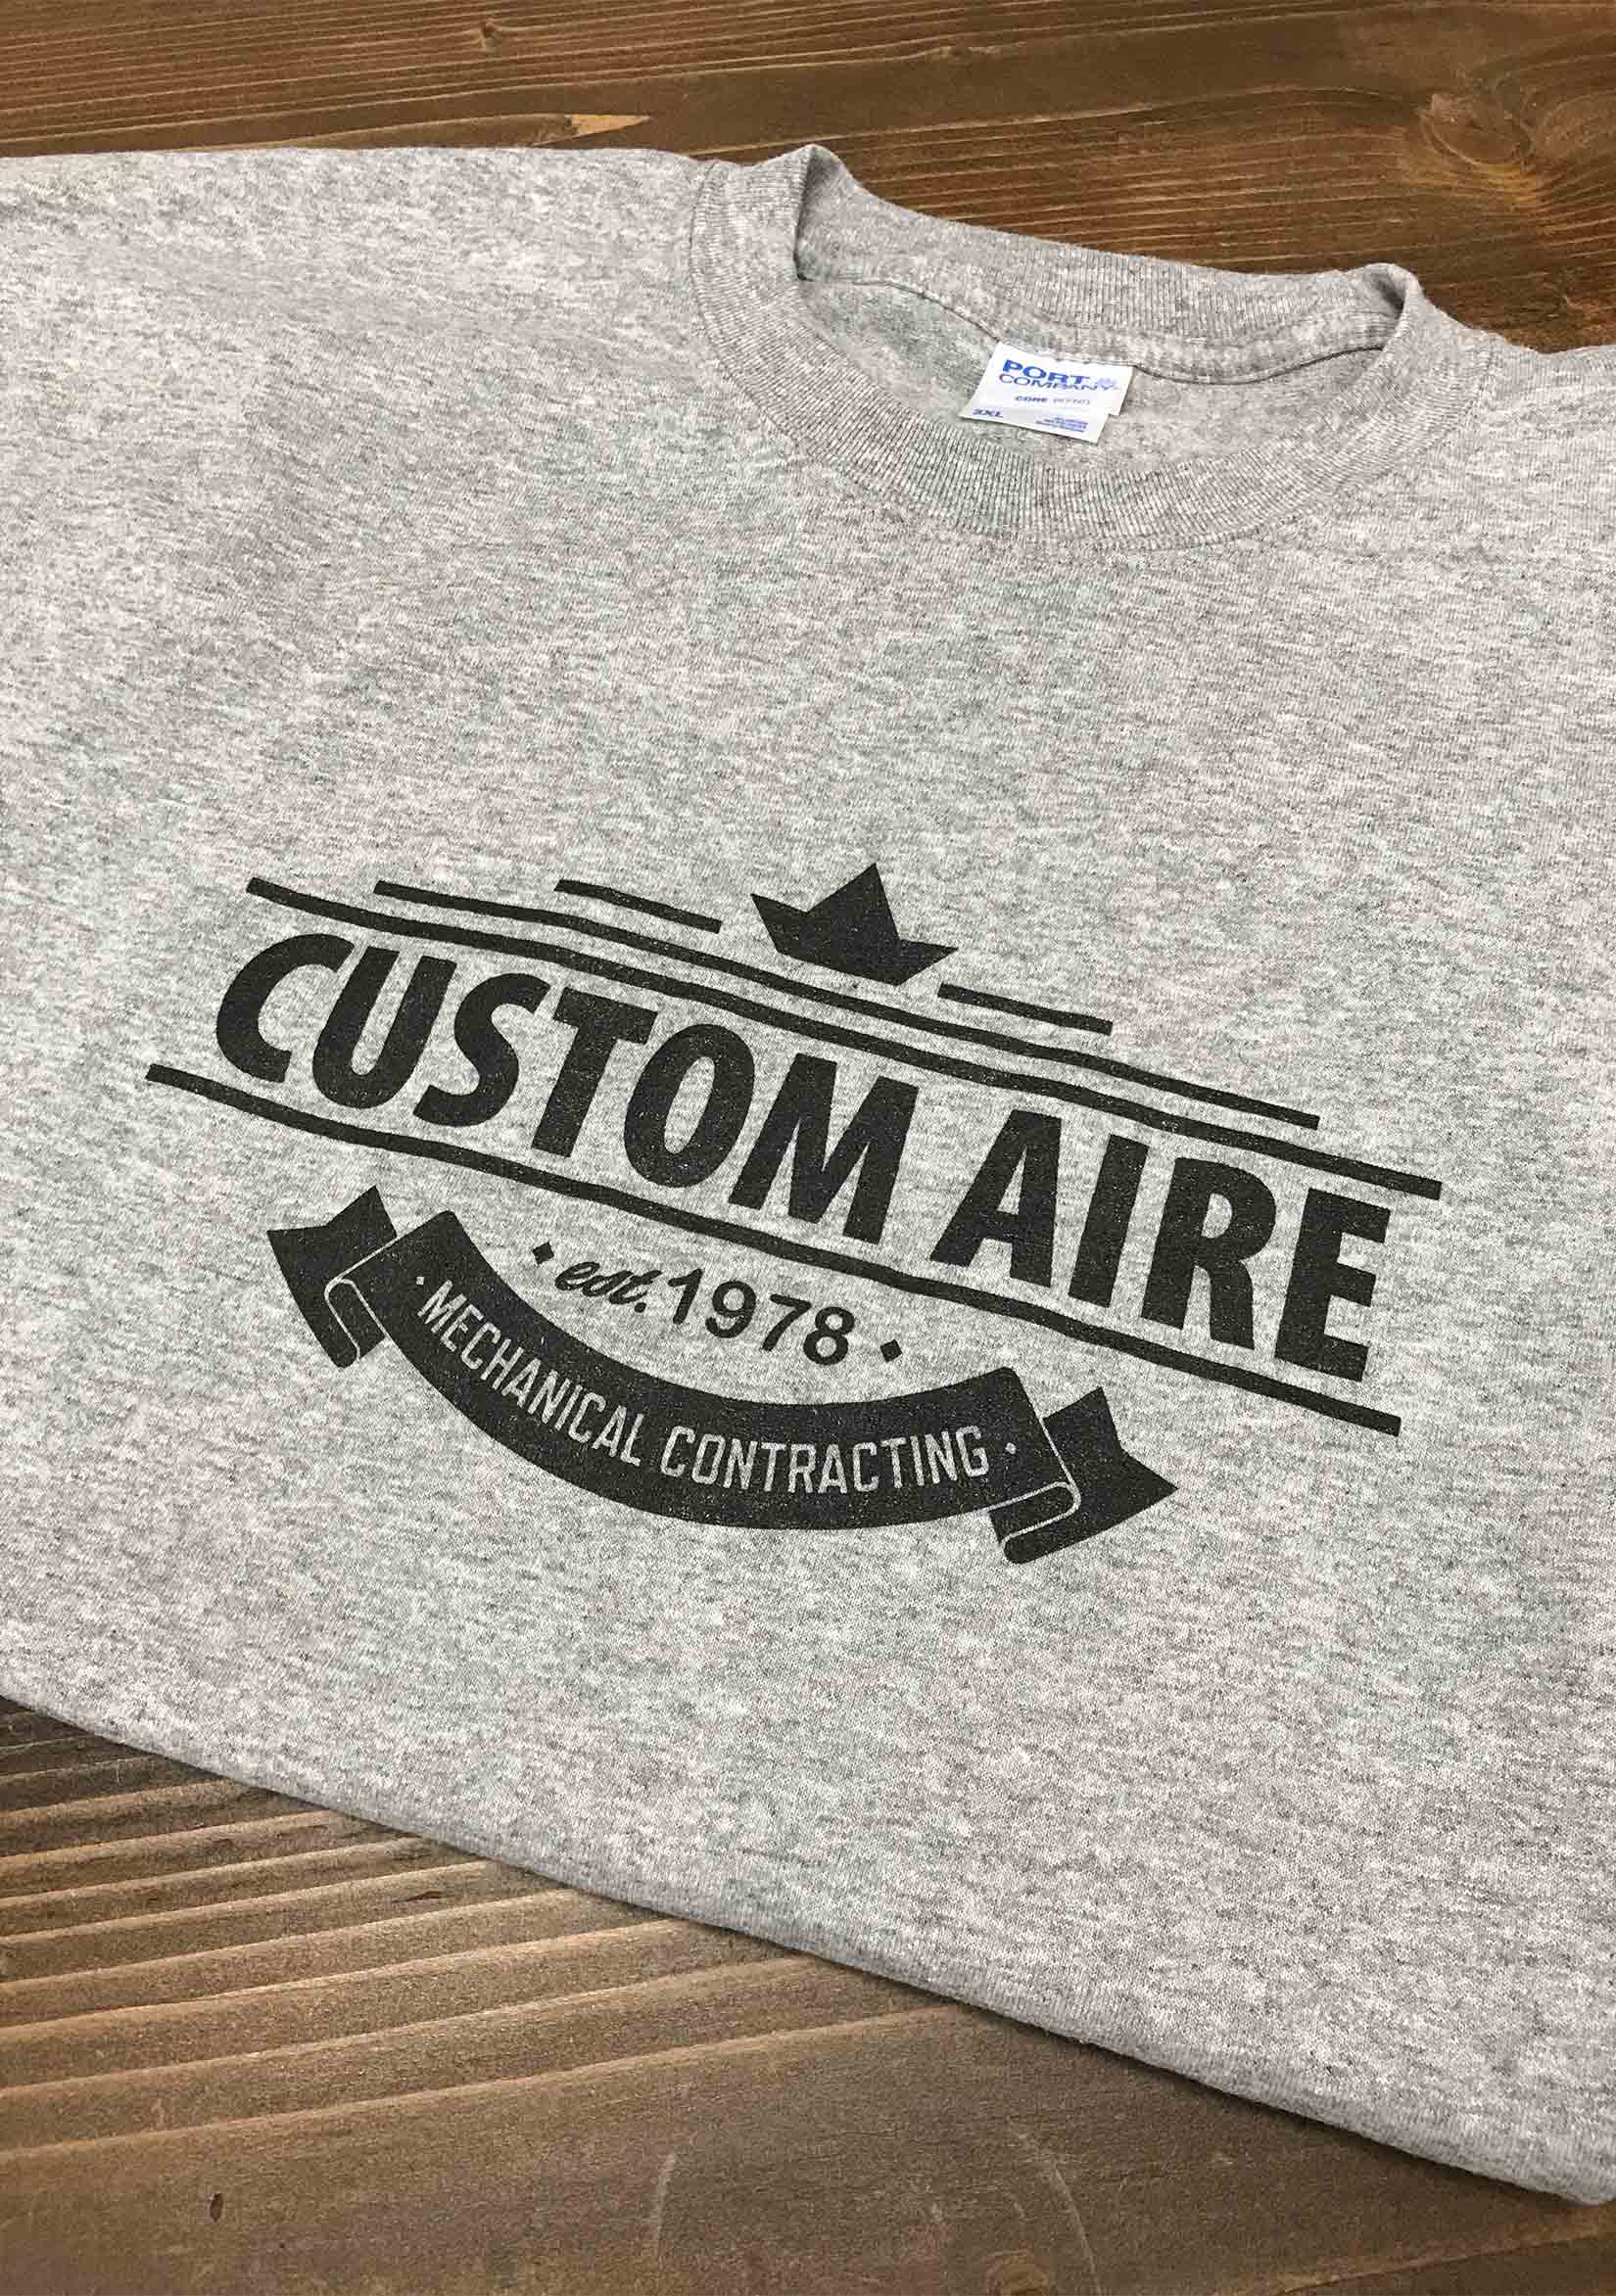 A light gray t-shirt screen printed with a Custom Aire logo in the center of the shirt